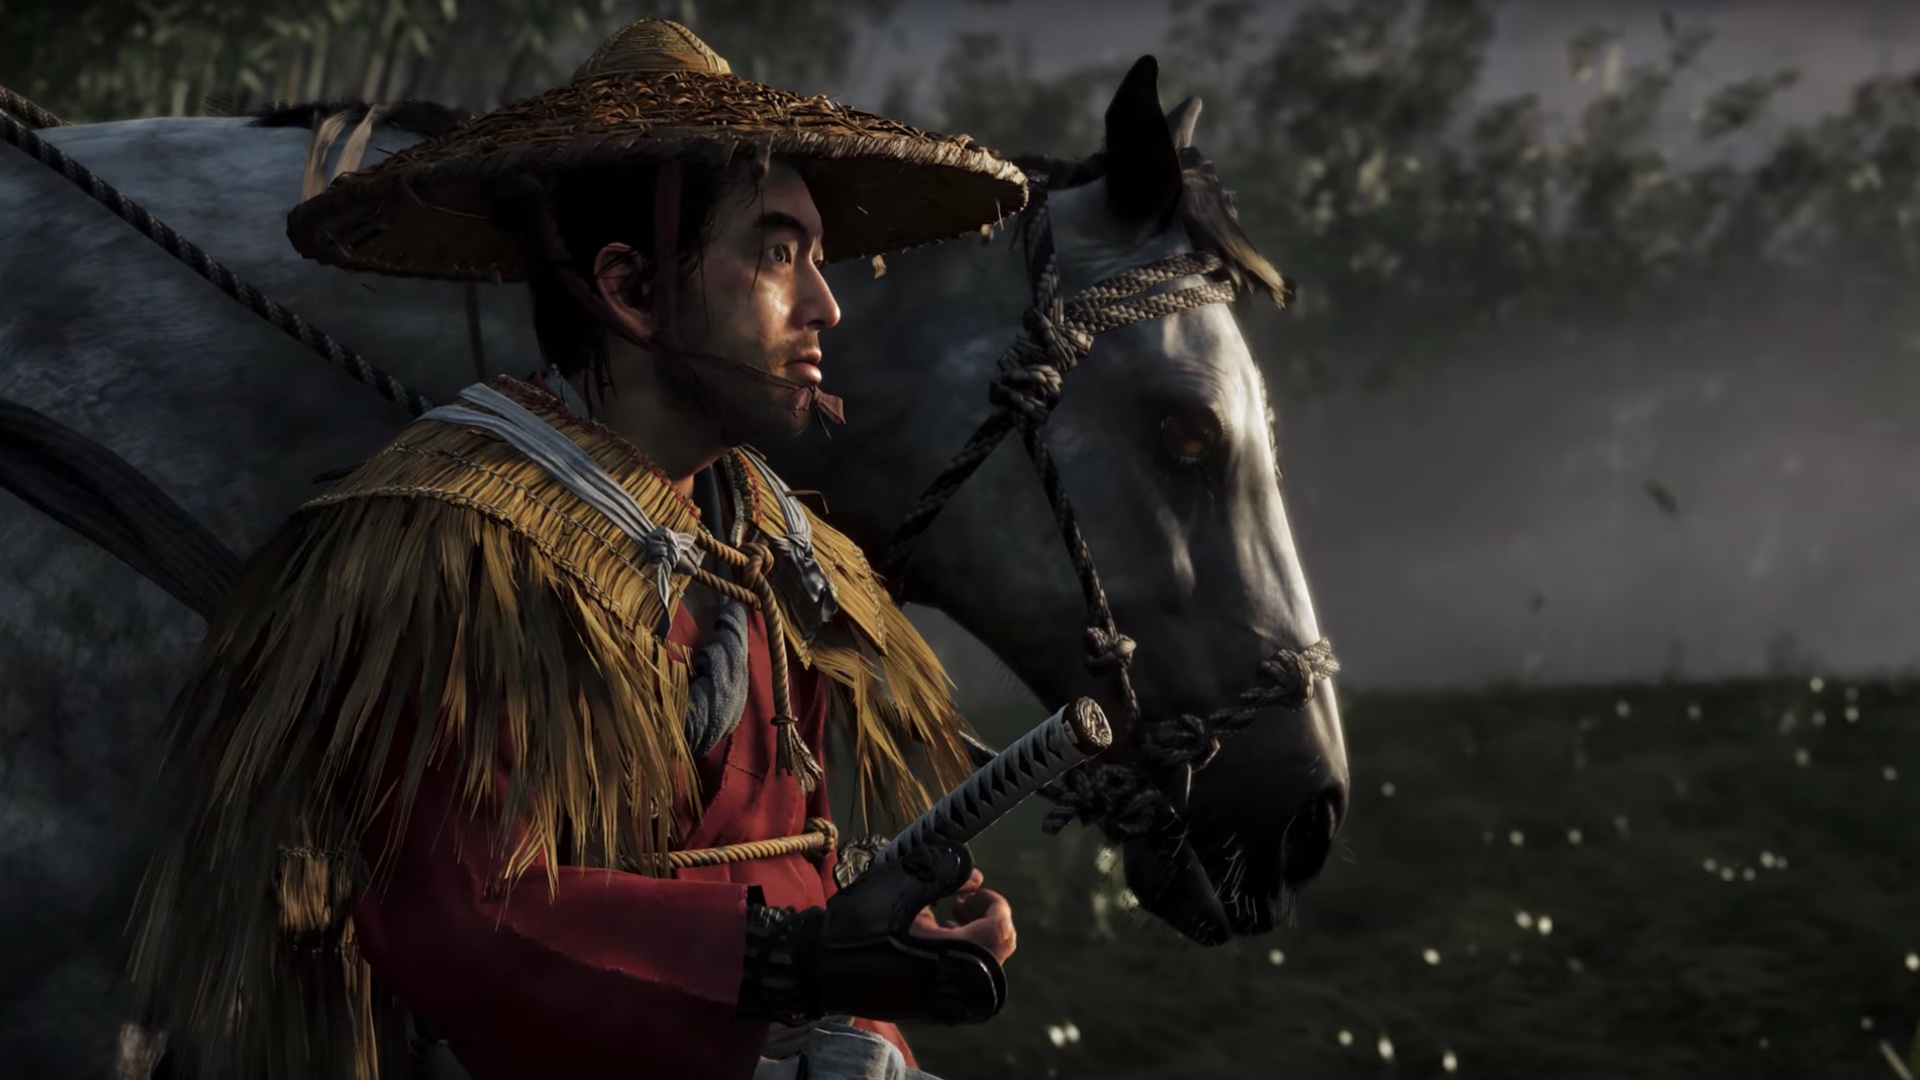 Sony treated us to 8 minutes of Ghost of Tsushima and it was